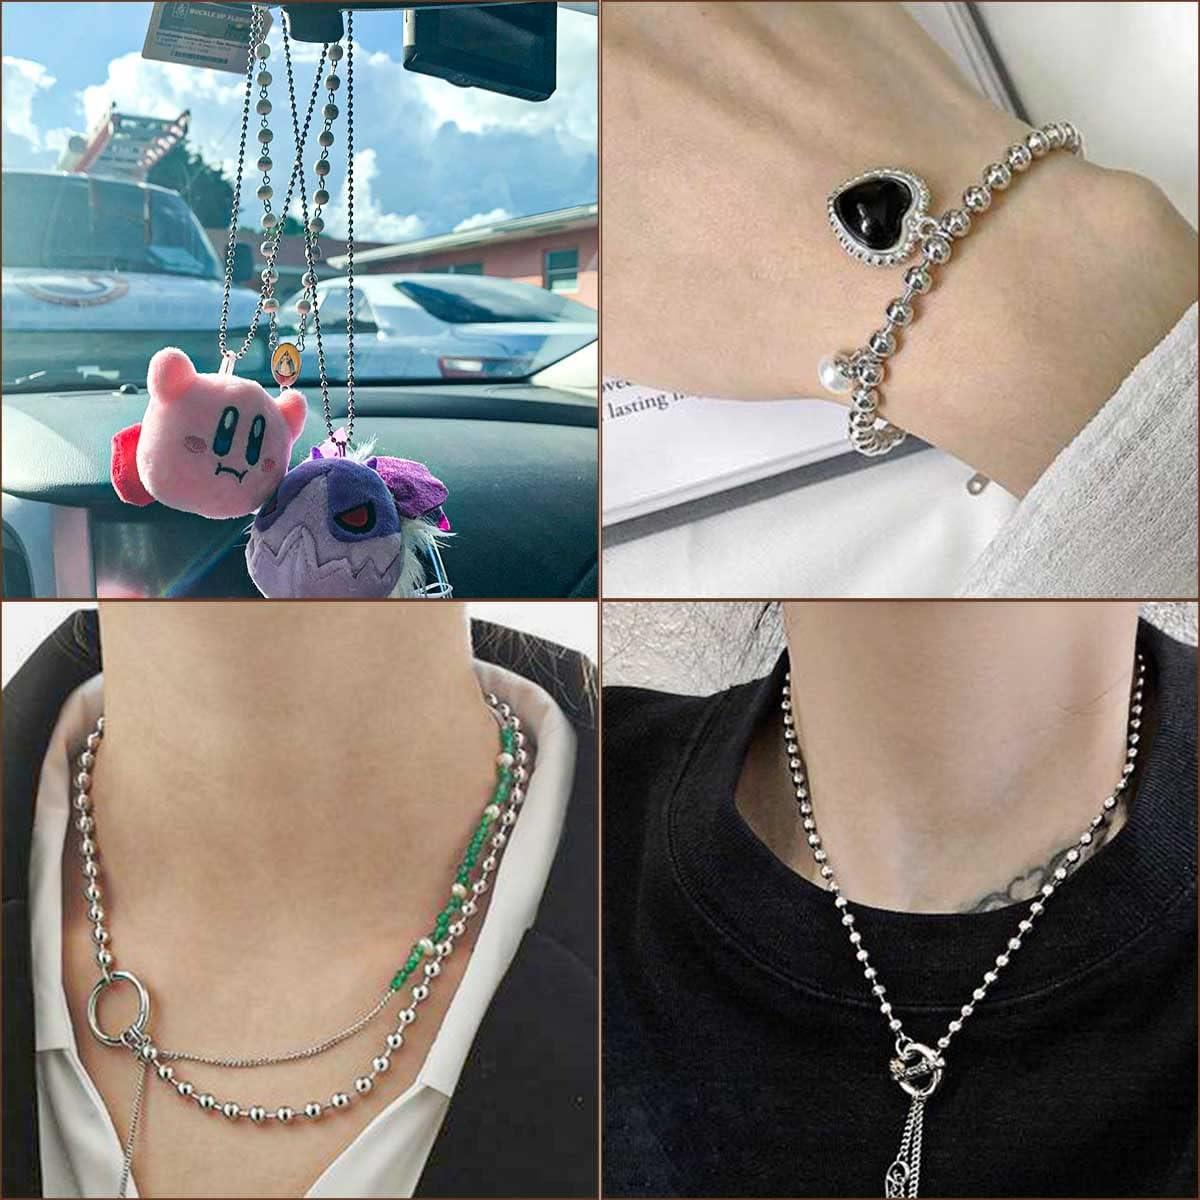 Necklace Chains and Chain Jewelry